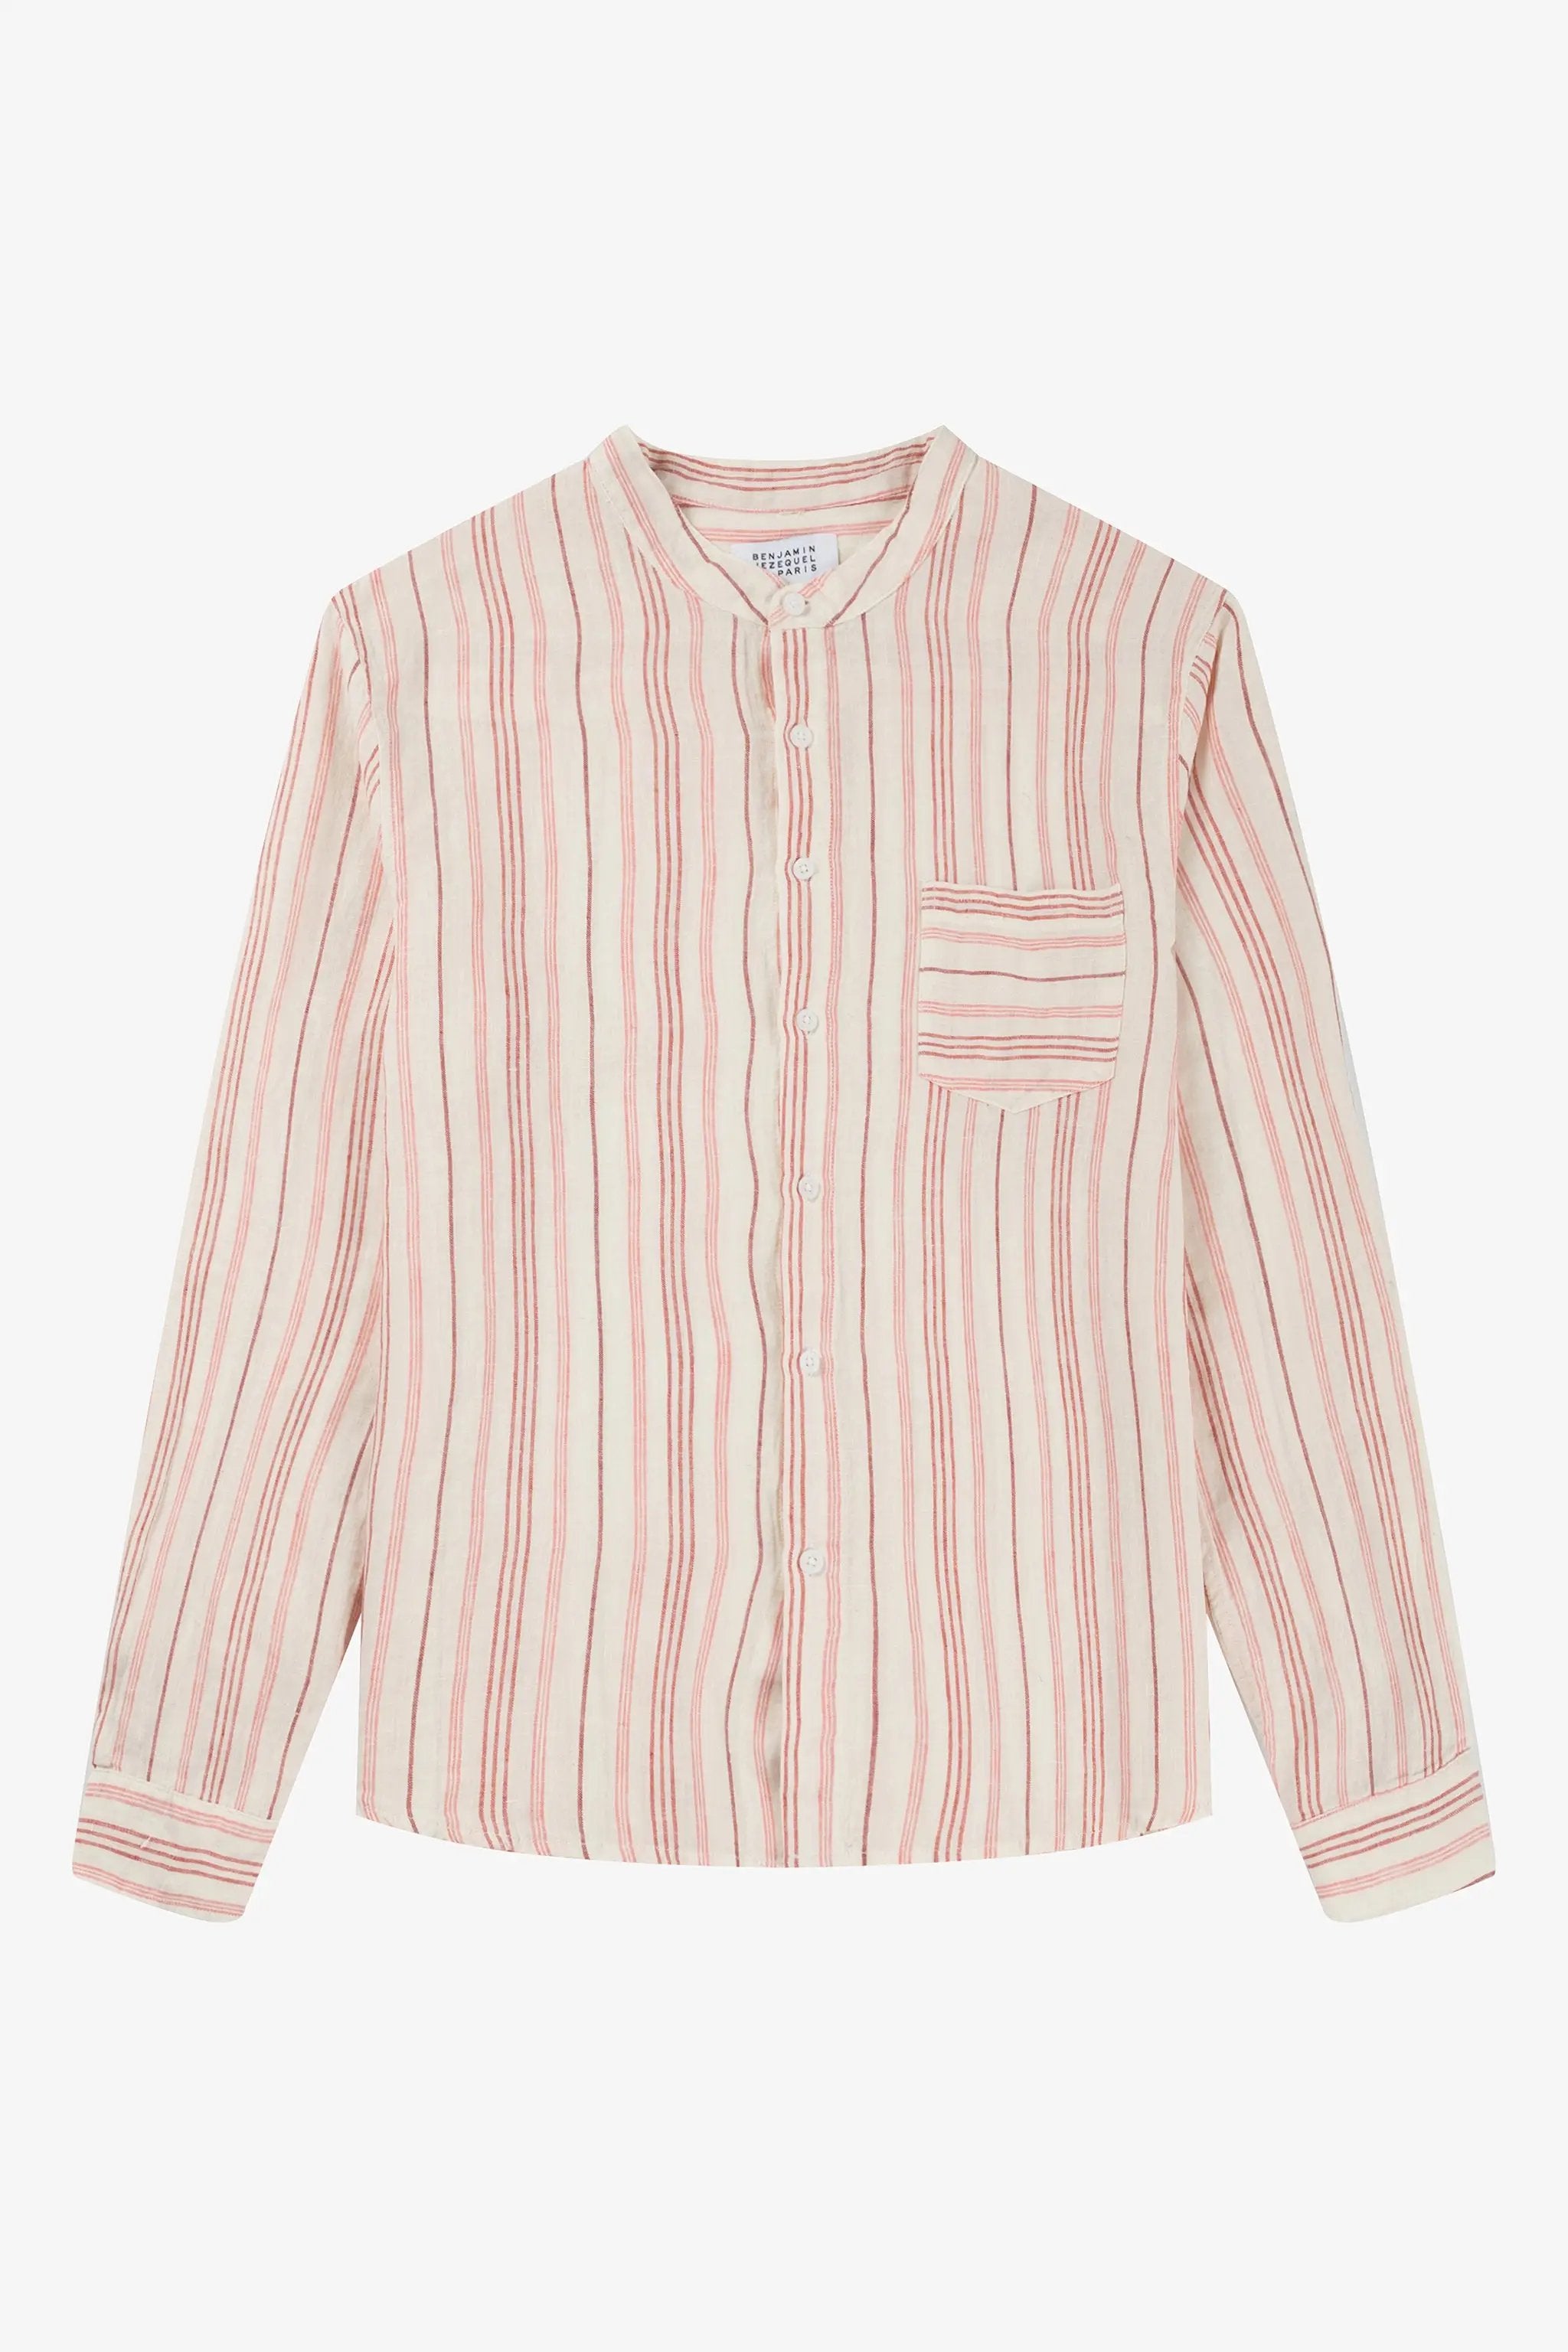 a white and red striped shirt with a pocket